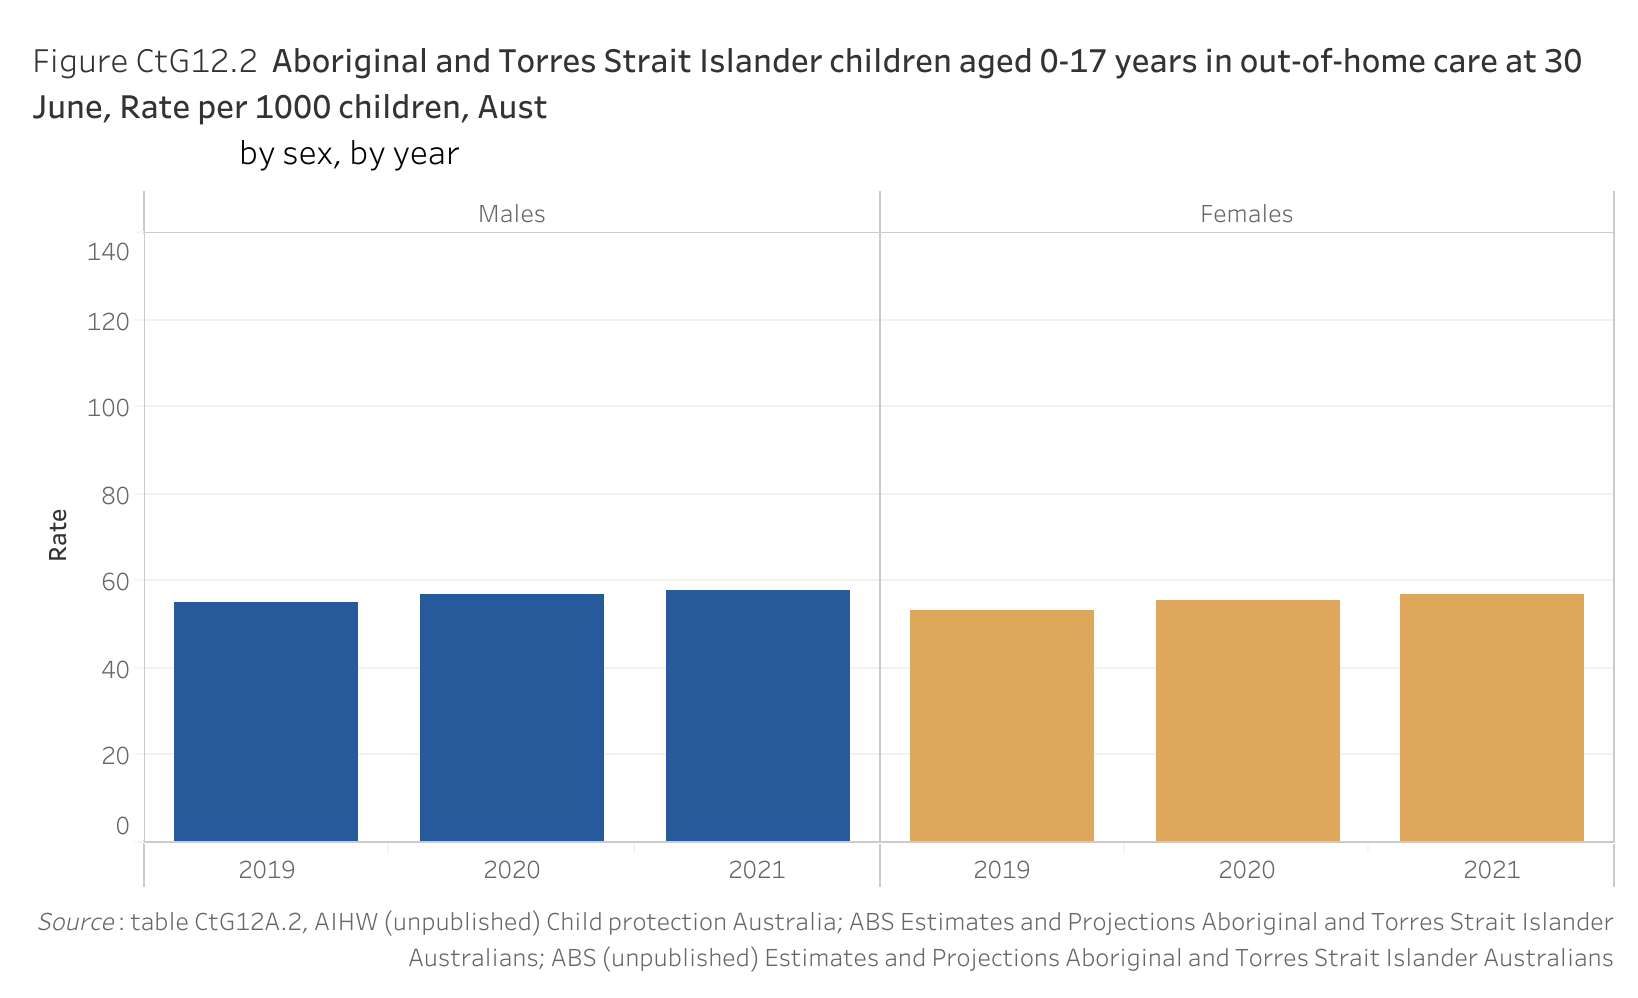 Figure CtG12.2. Bar chart showing the rate of Aboriginal and Torres Strait Islander children aged 0-17 years in out-of-home care per 1000 population at 30 June in Australia, by sex and by year. Data table of figure CtG12.2 is below.